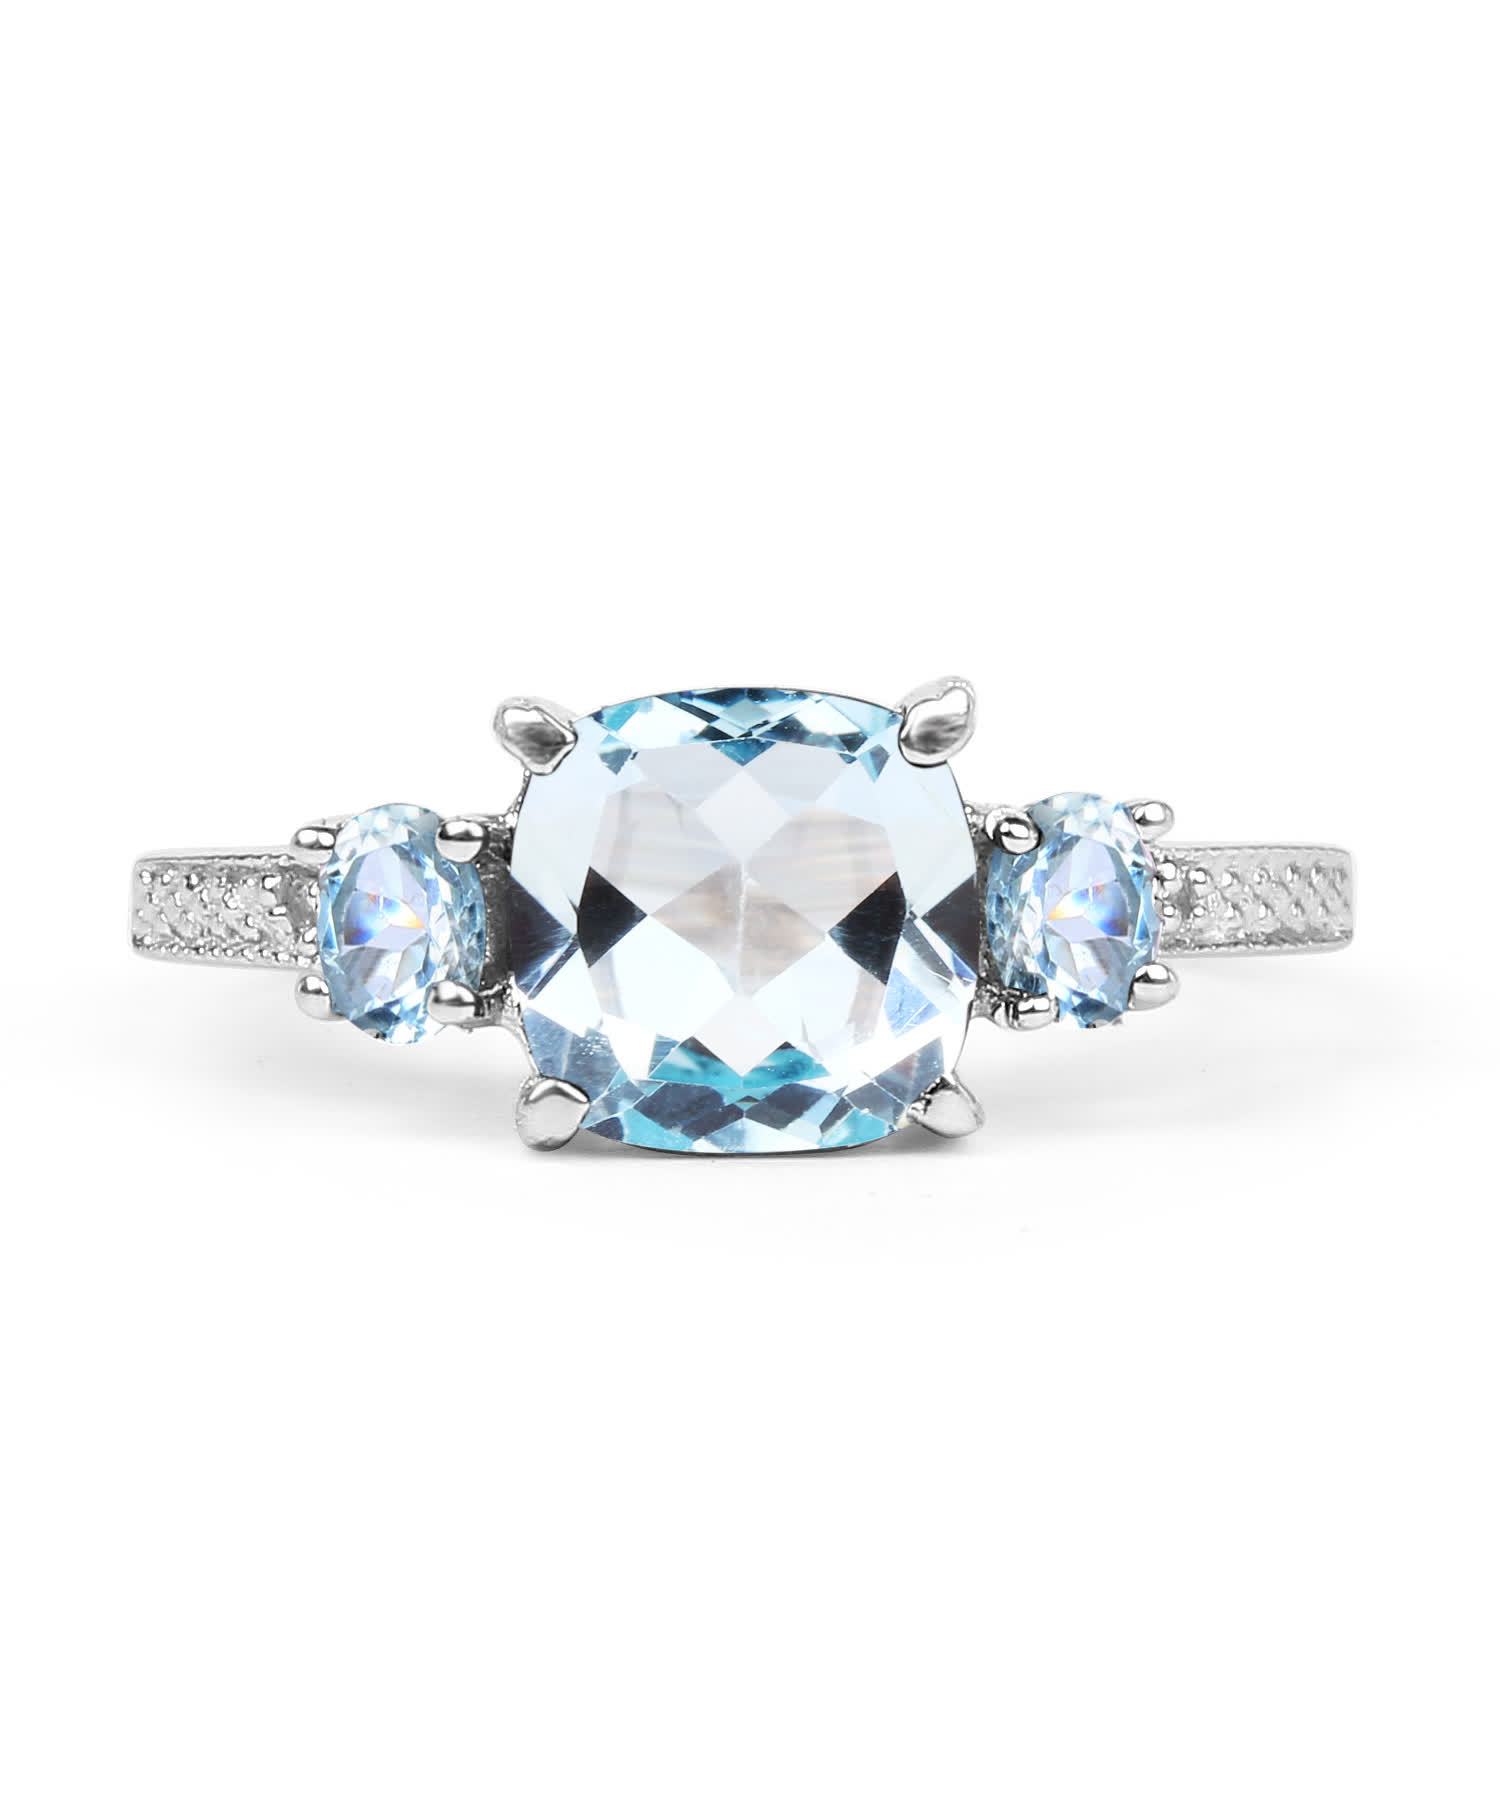 2.91ctw Natural Sky Blue Topaz Rhodium Plated 925 Sterling Silver Three-Stone Ring View 3